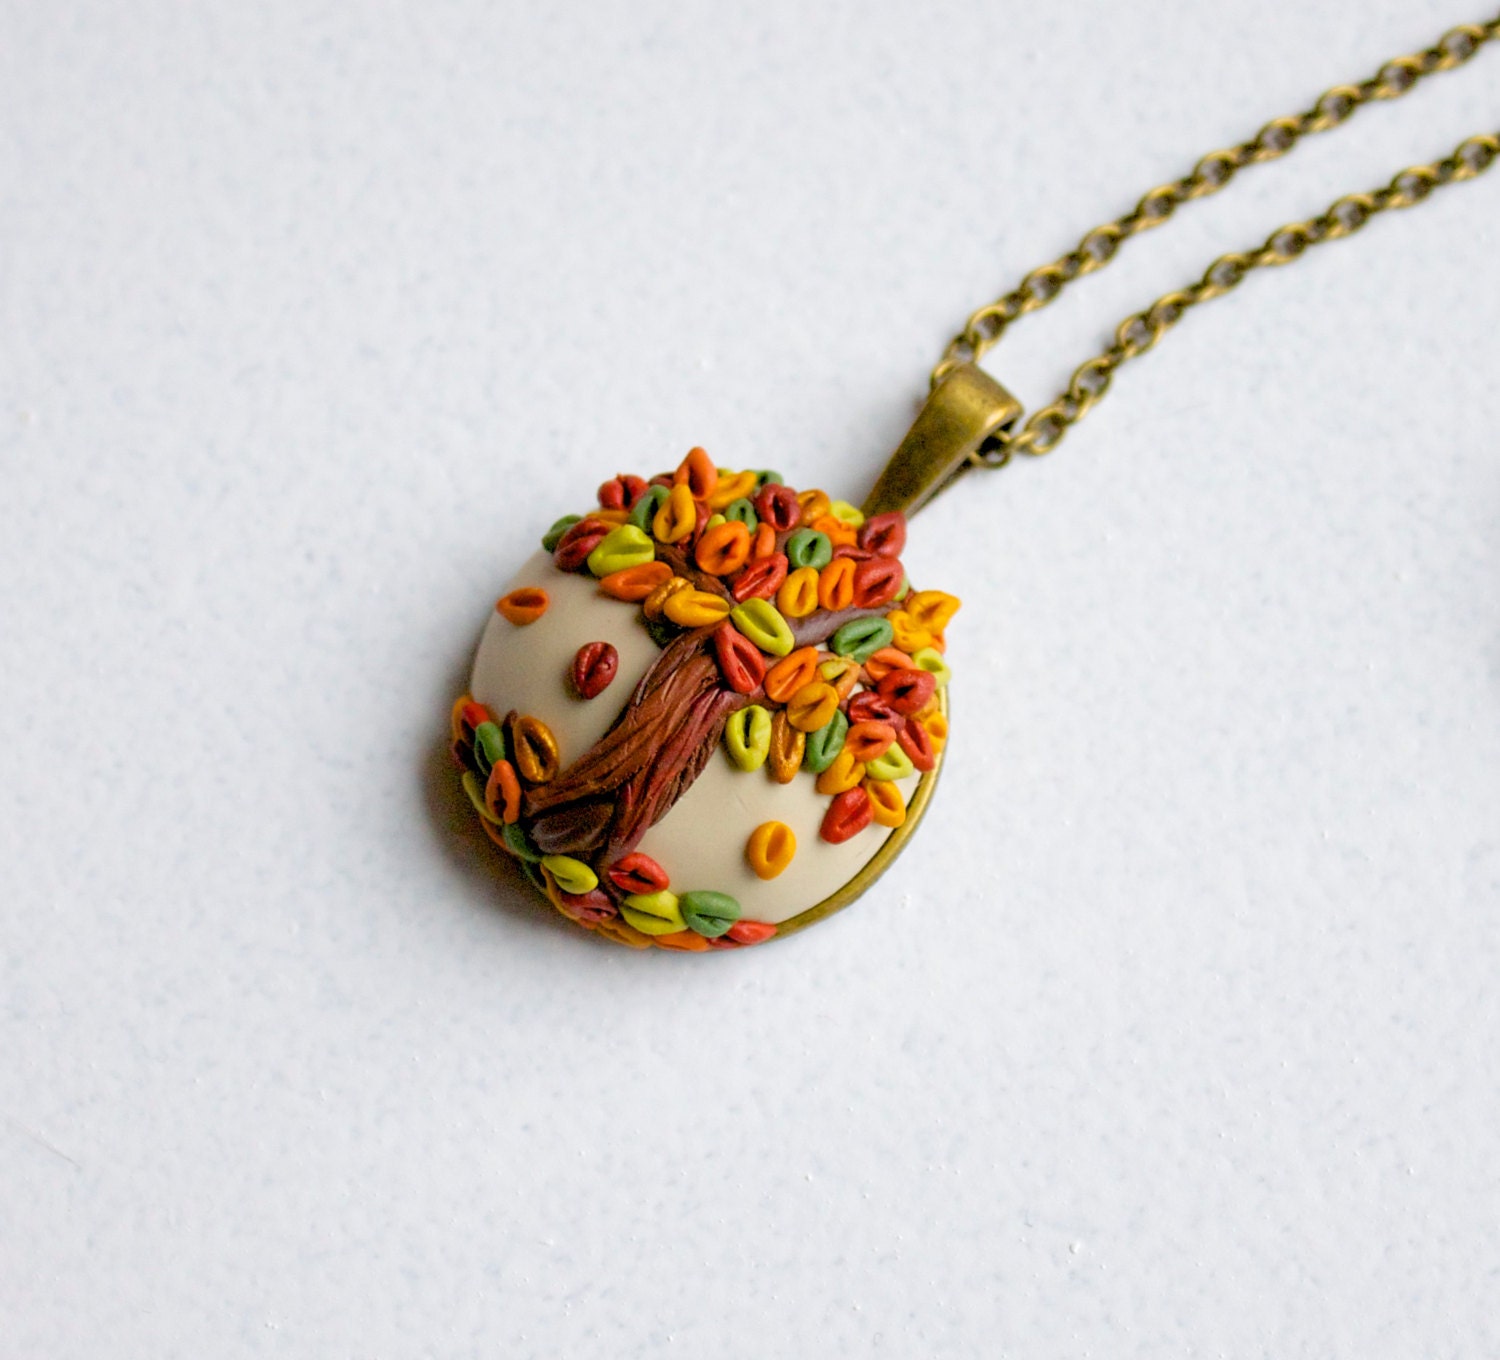 Fall tree pendant - polymer clay tree necklace - colorful autumn leaves - TheCraftyBeeOnline